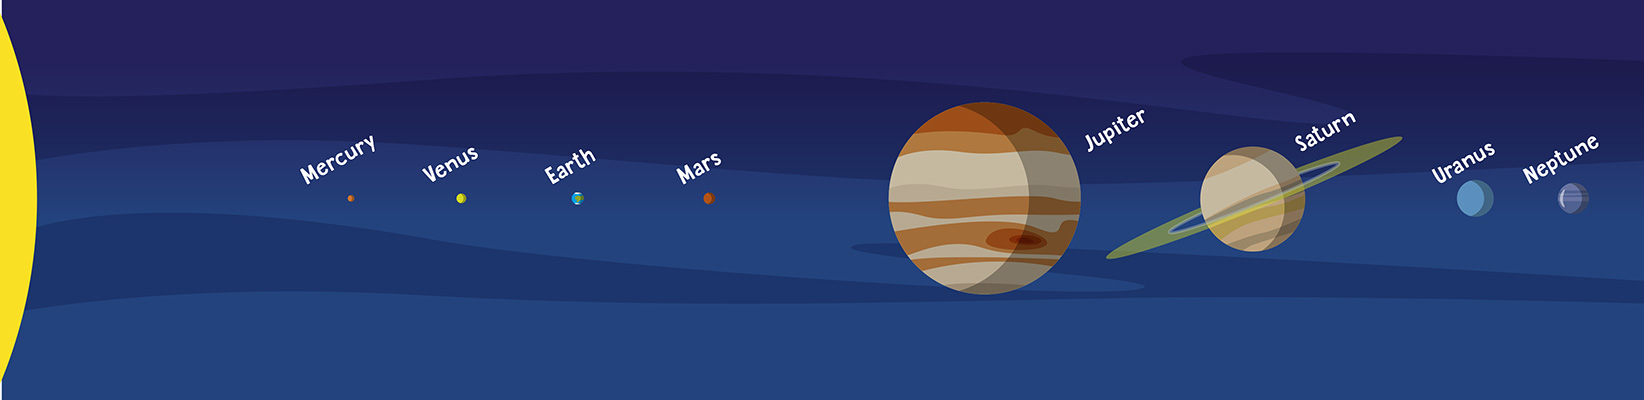 Gallery image for solar system diagram (without Pluto)